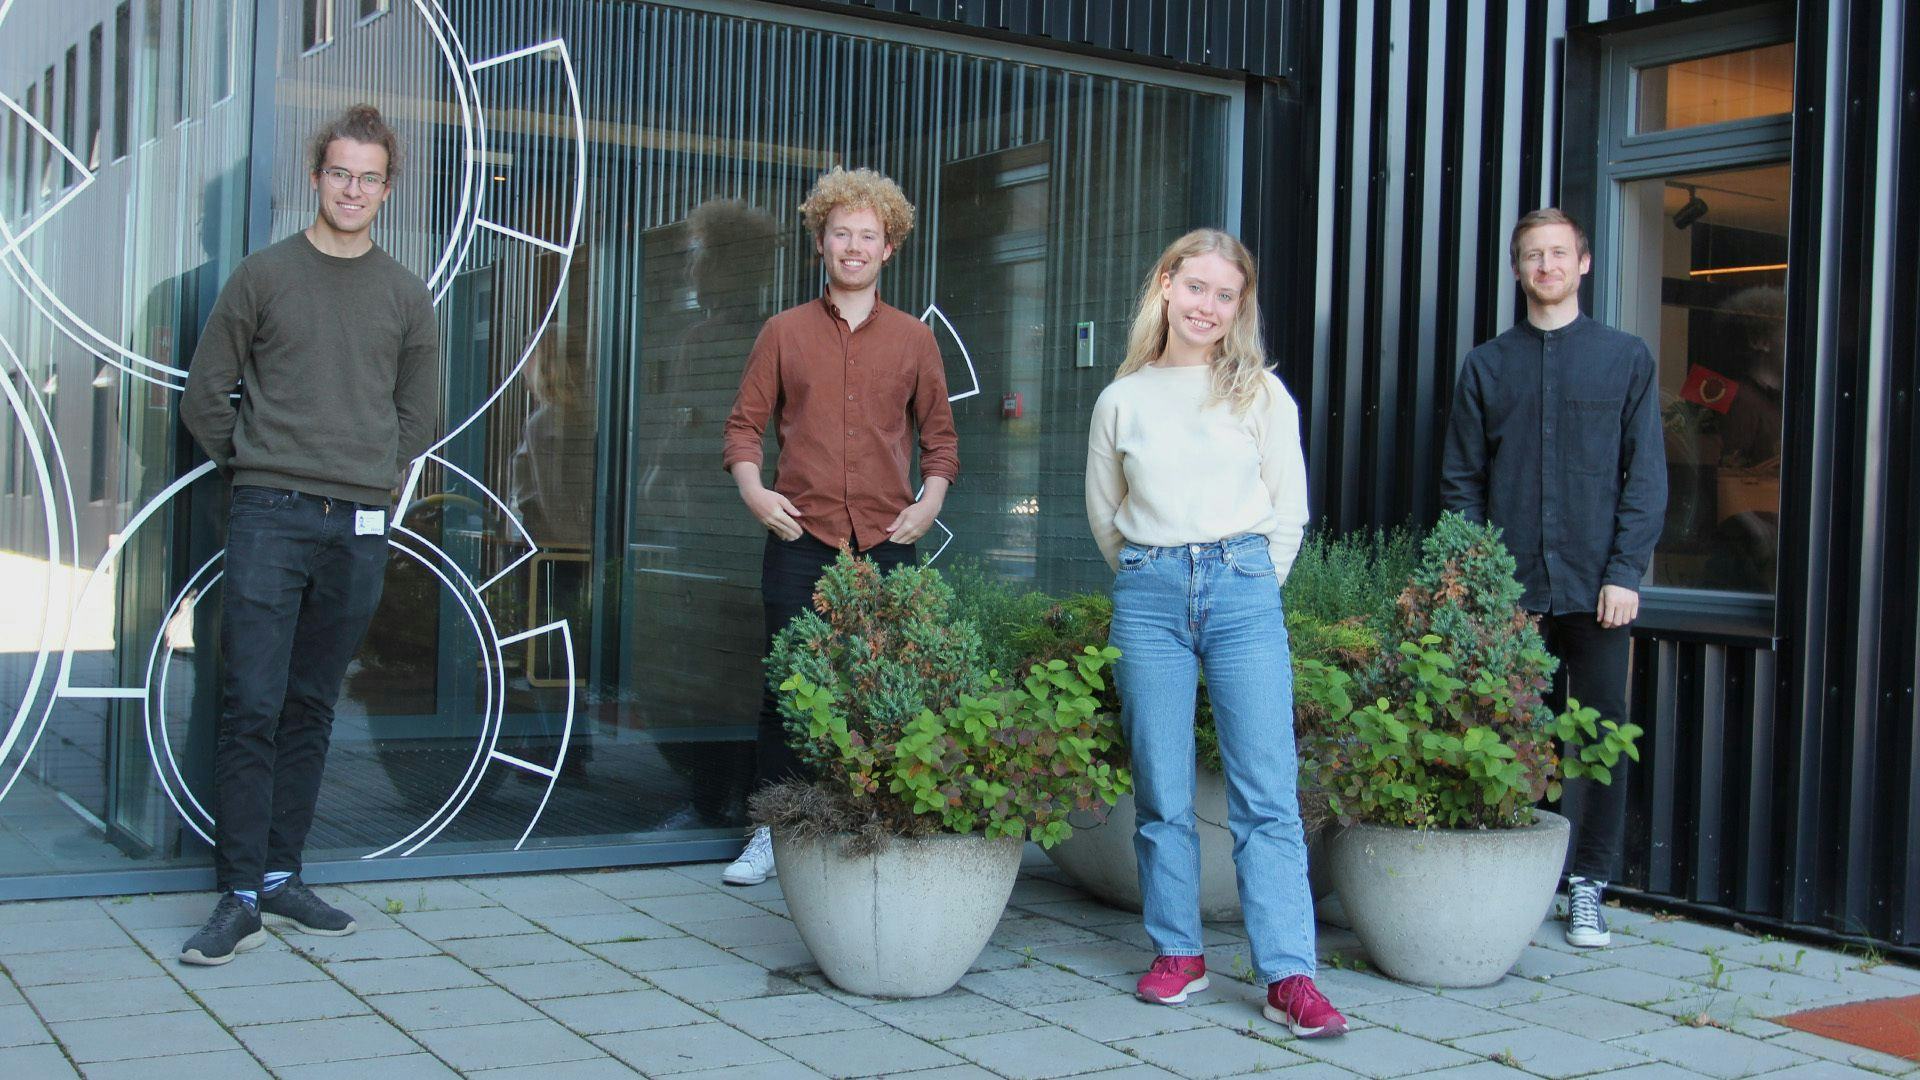 Four individuals casually standing outdoors next to large potted plants and decorative metal work